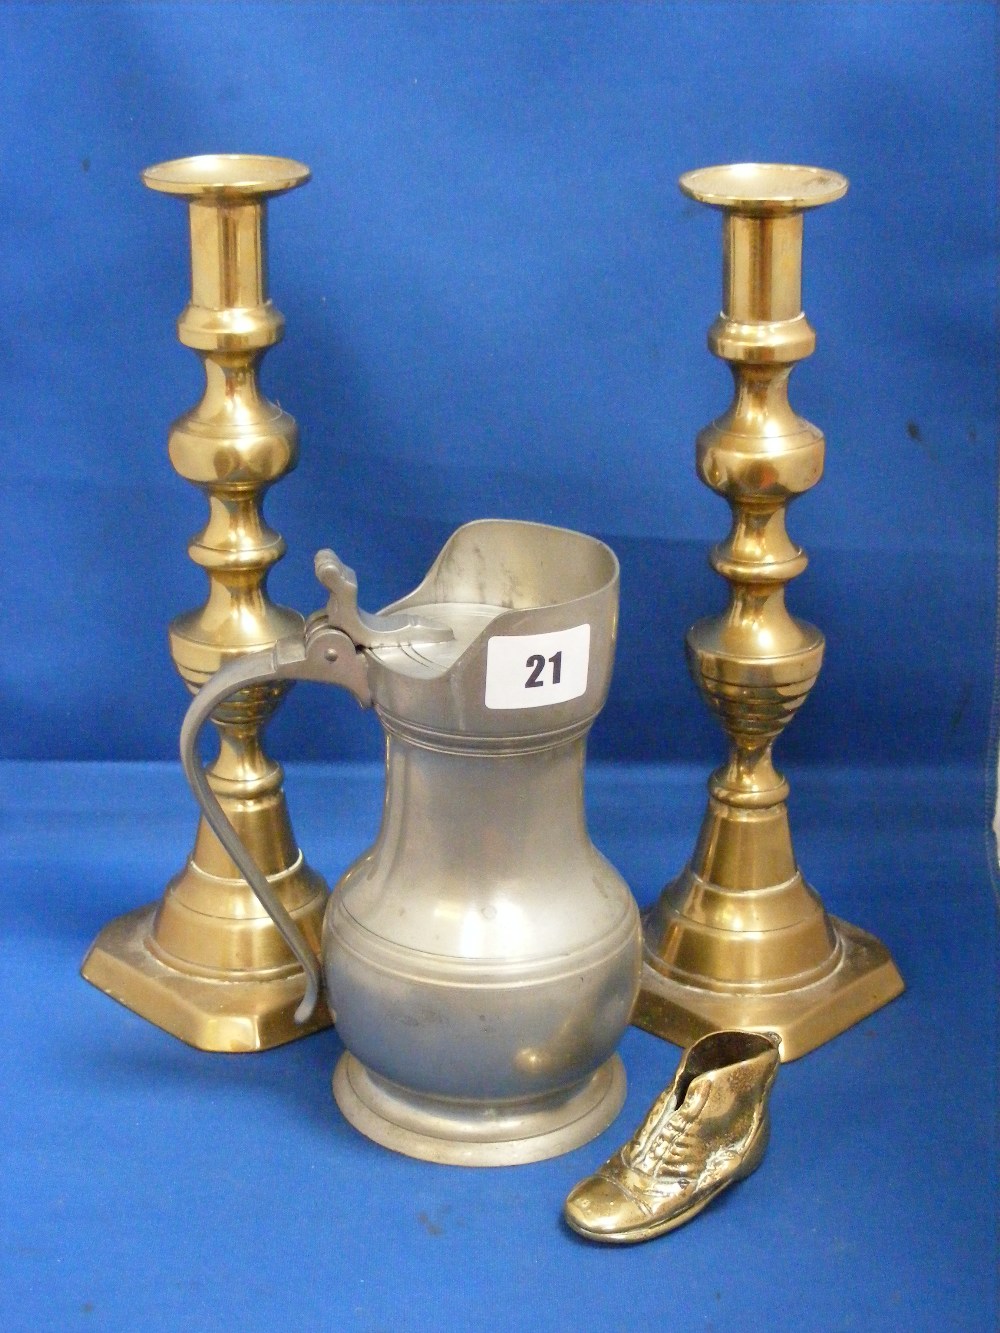 A collection of vintage metalware items, to include a French pewter jug, a pair of brass